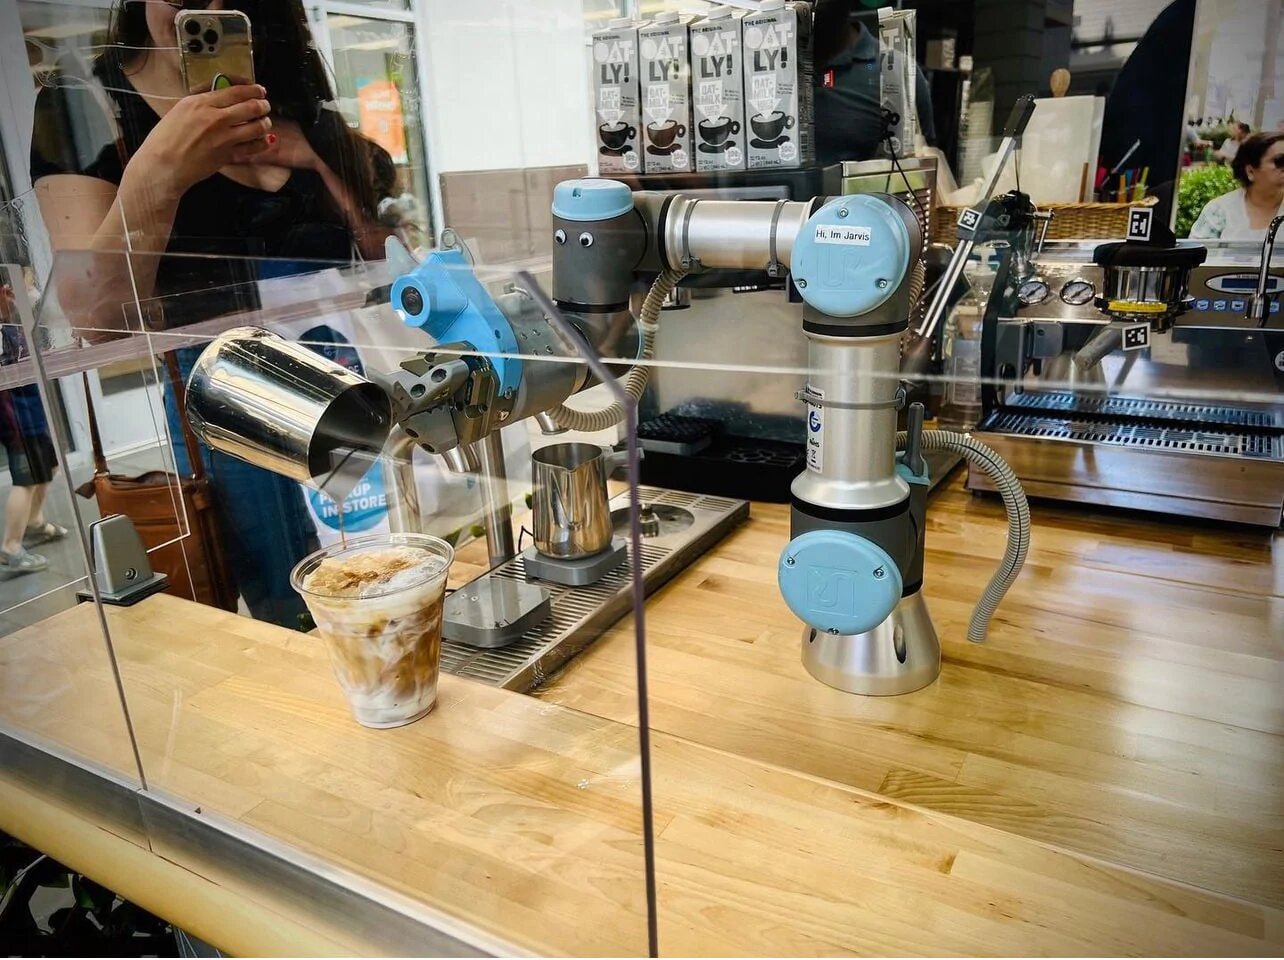 Seattle startups bring robots to coffee, pizza prep